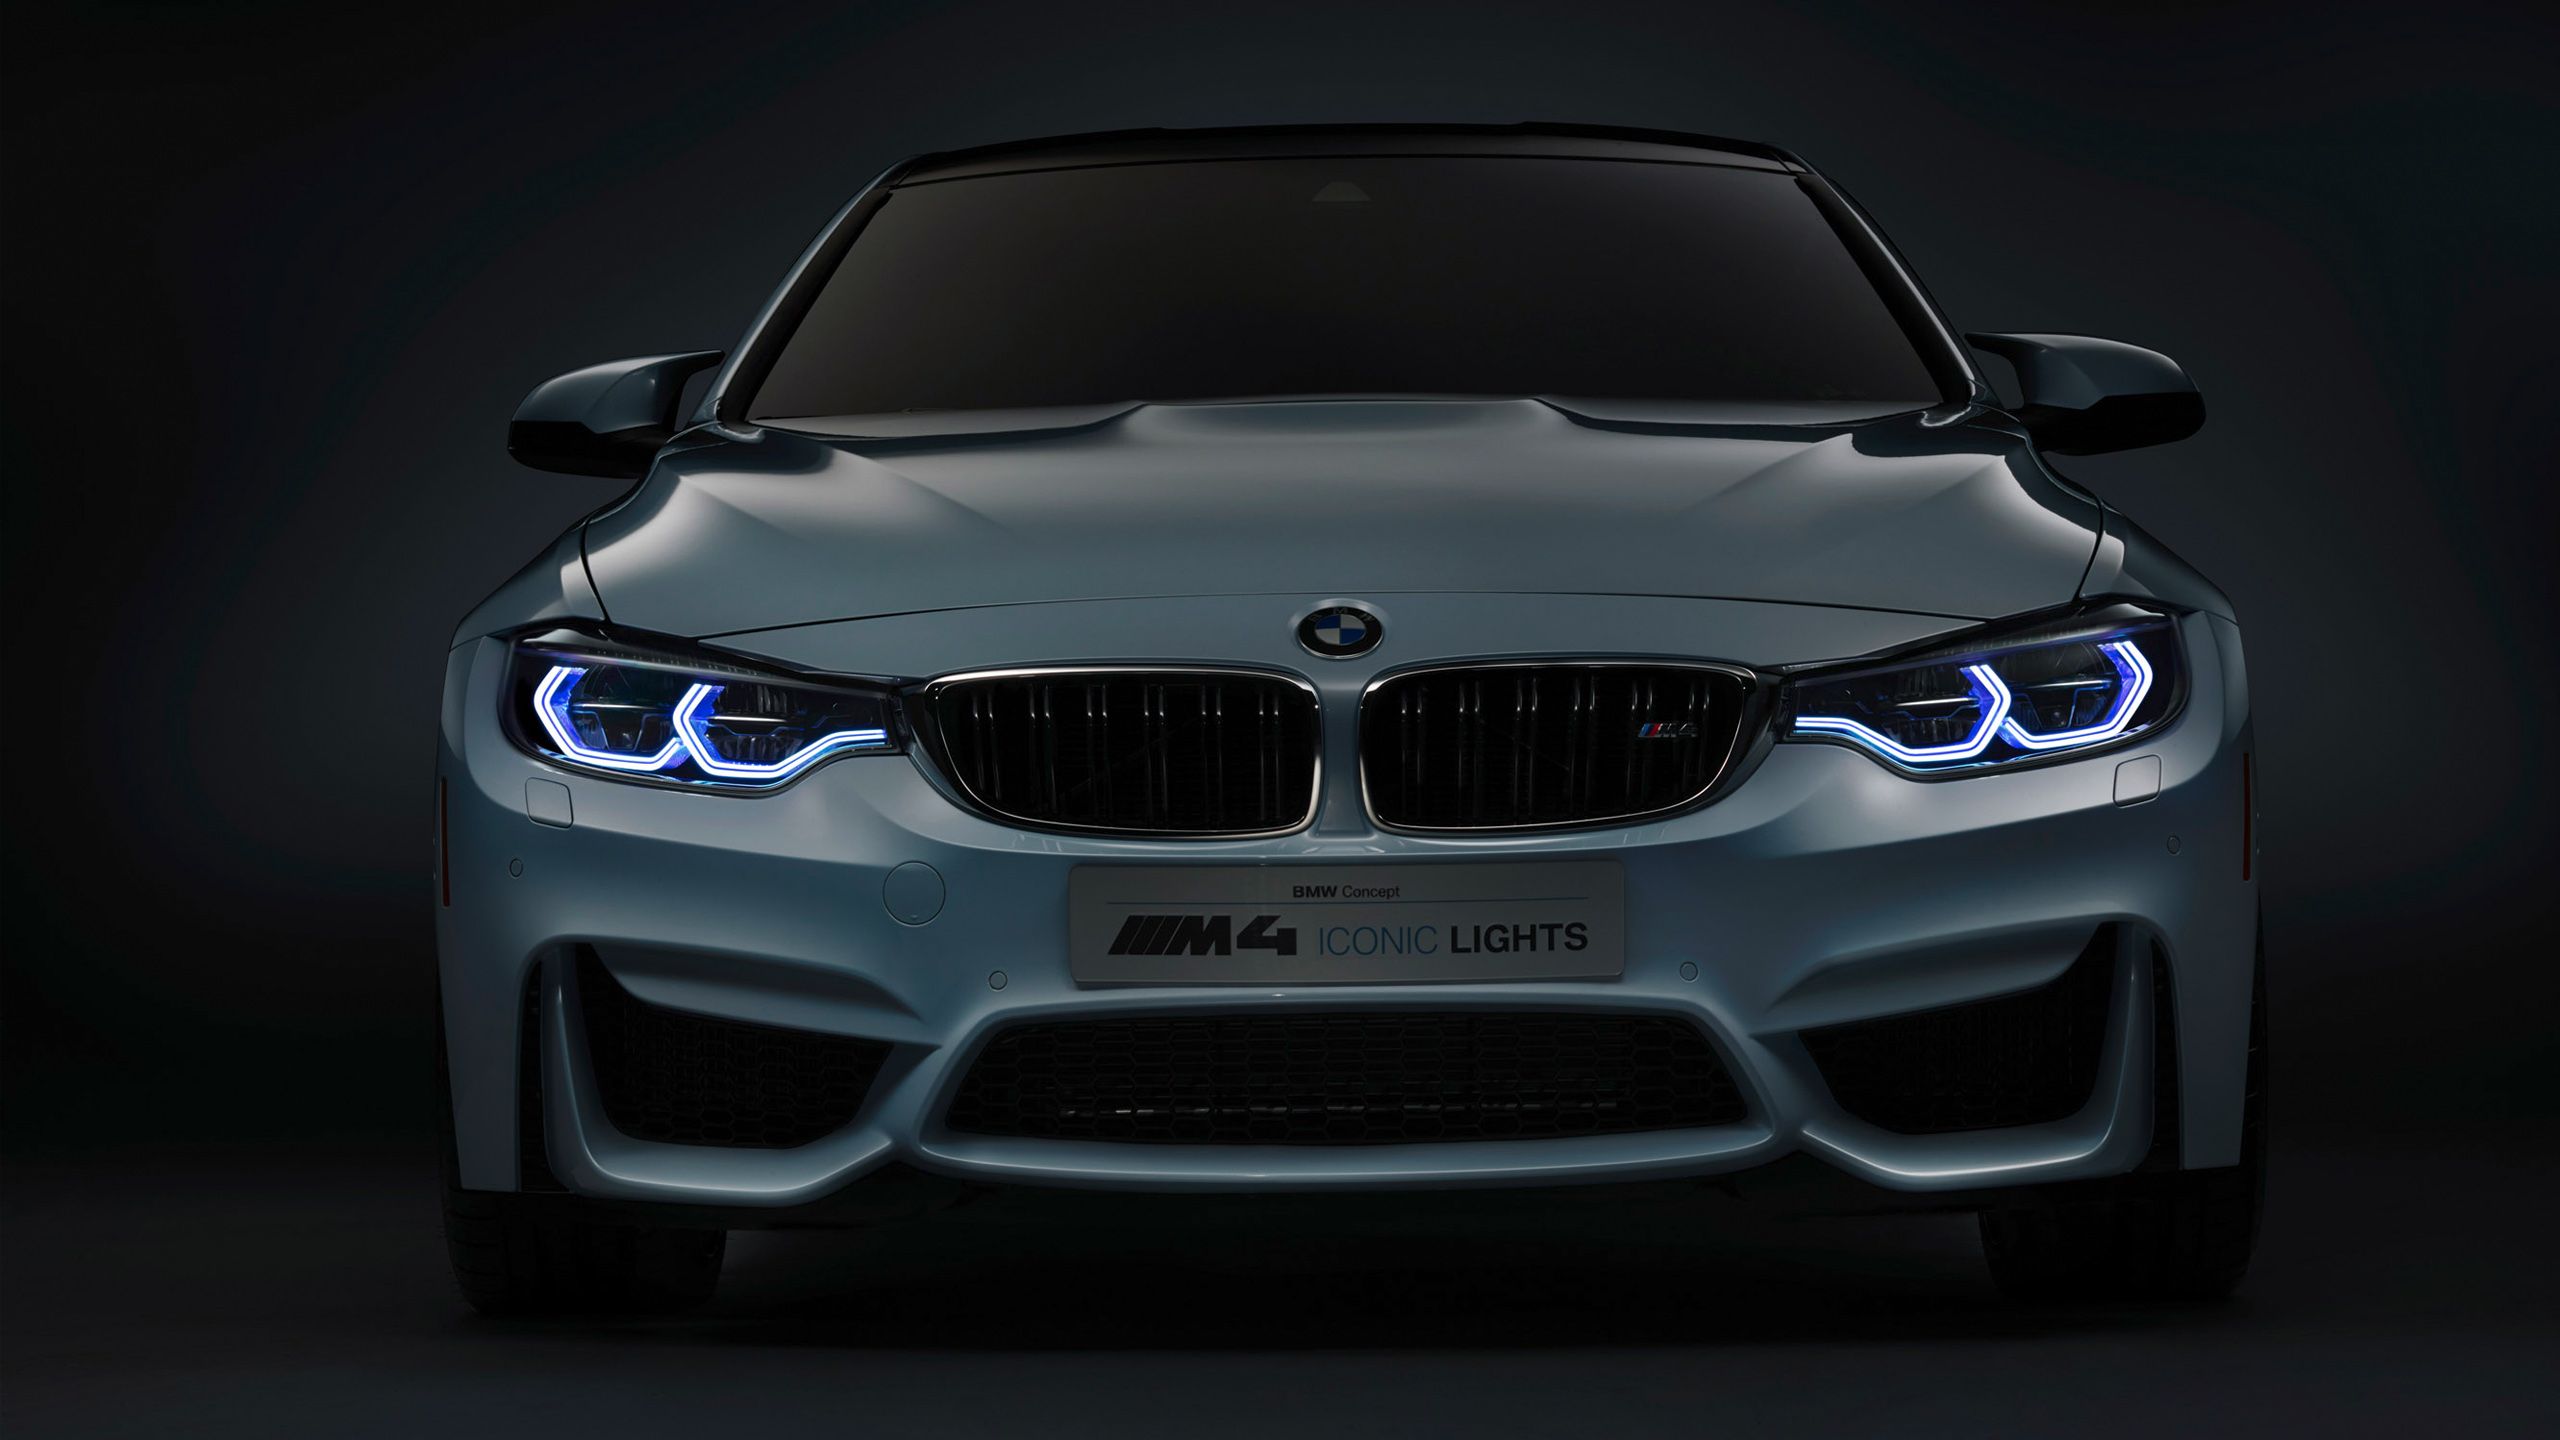 2015 BMW M4 Concept Iconic Lights Wallpaper | HD Car Wallpapers